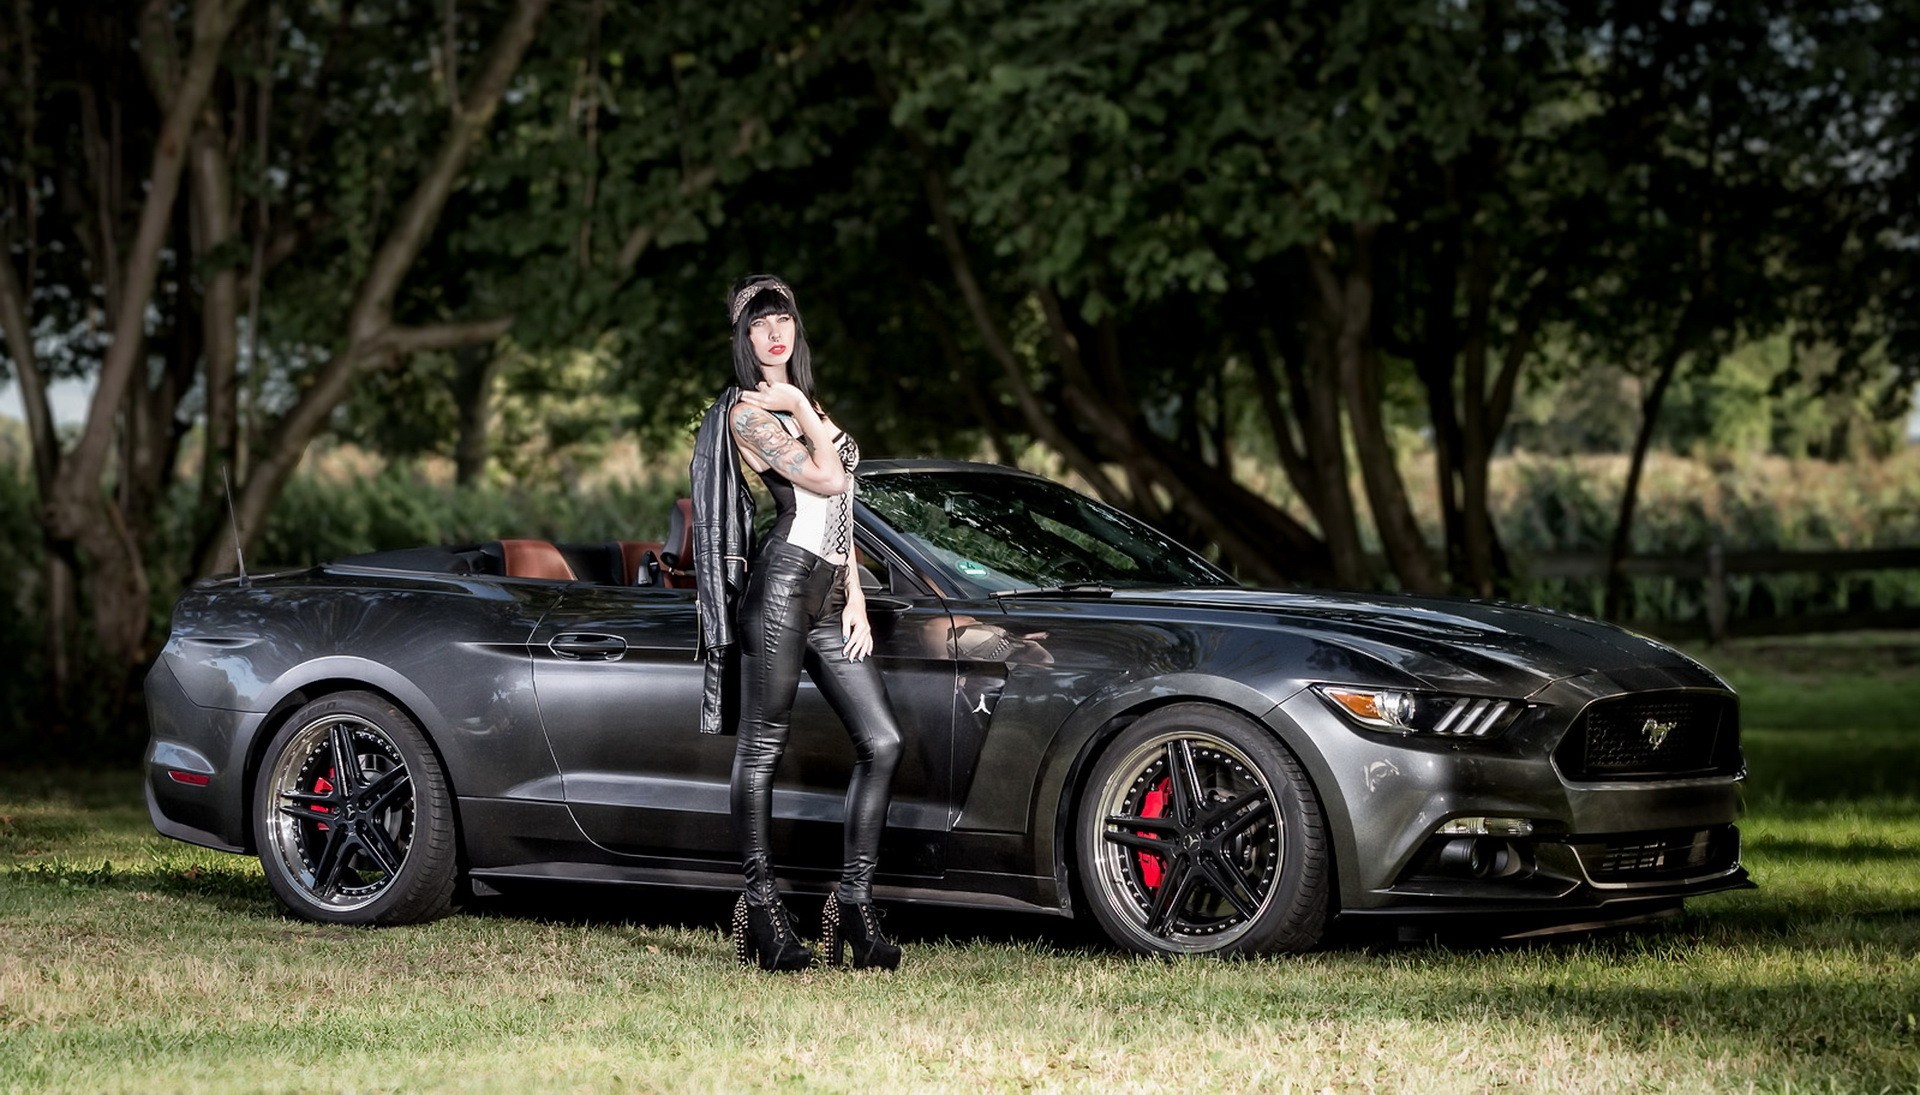 People 1920x1095 women punk women with cars car vehicle model black cars tattoo women outdoors Ford Mustang Ford leather pants  heels standing black hair Ford Mustang S550 muscle cars American cars